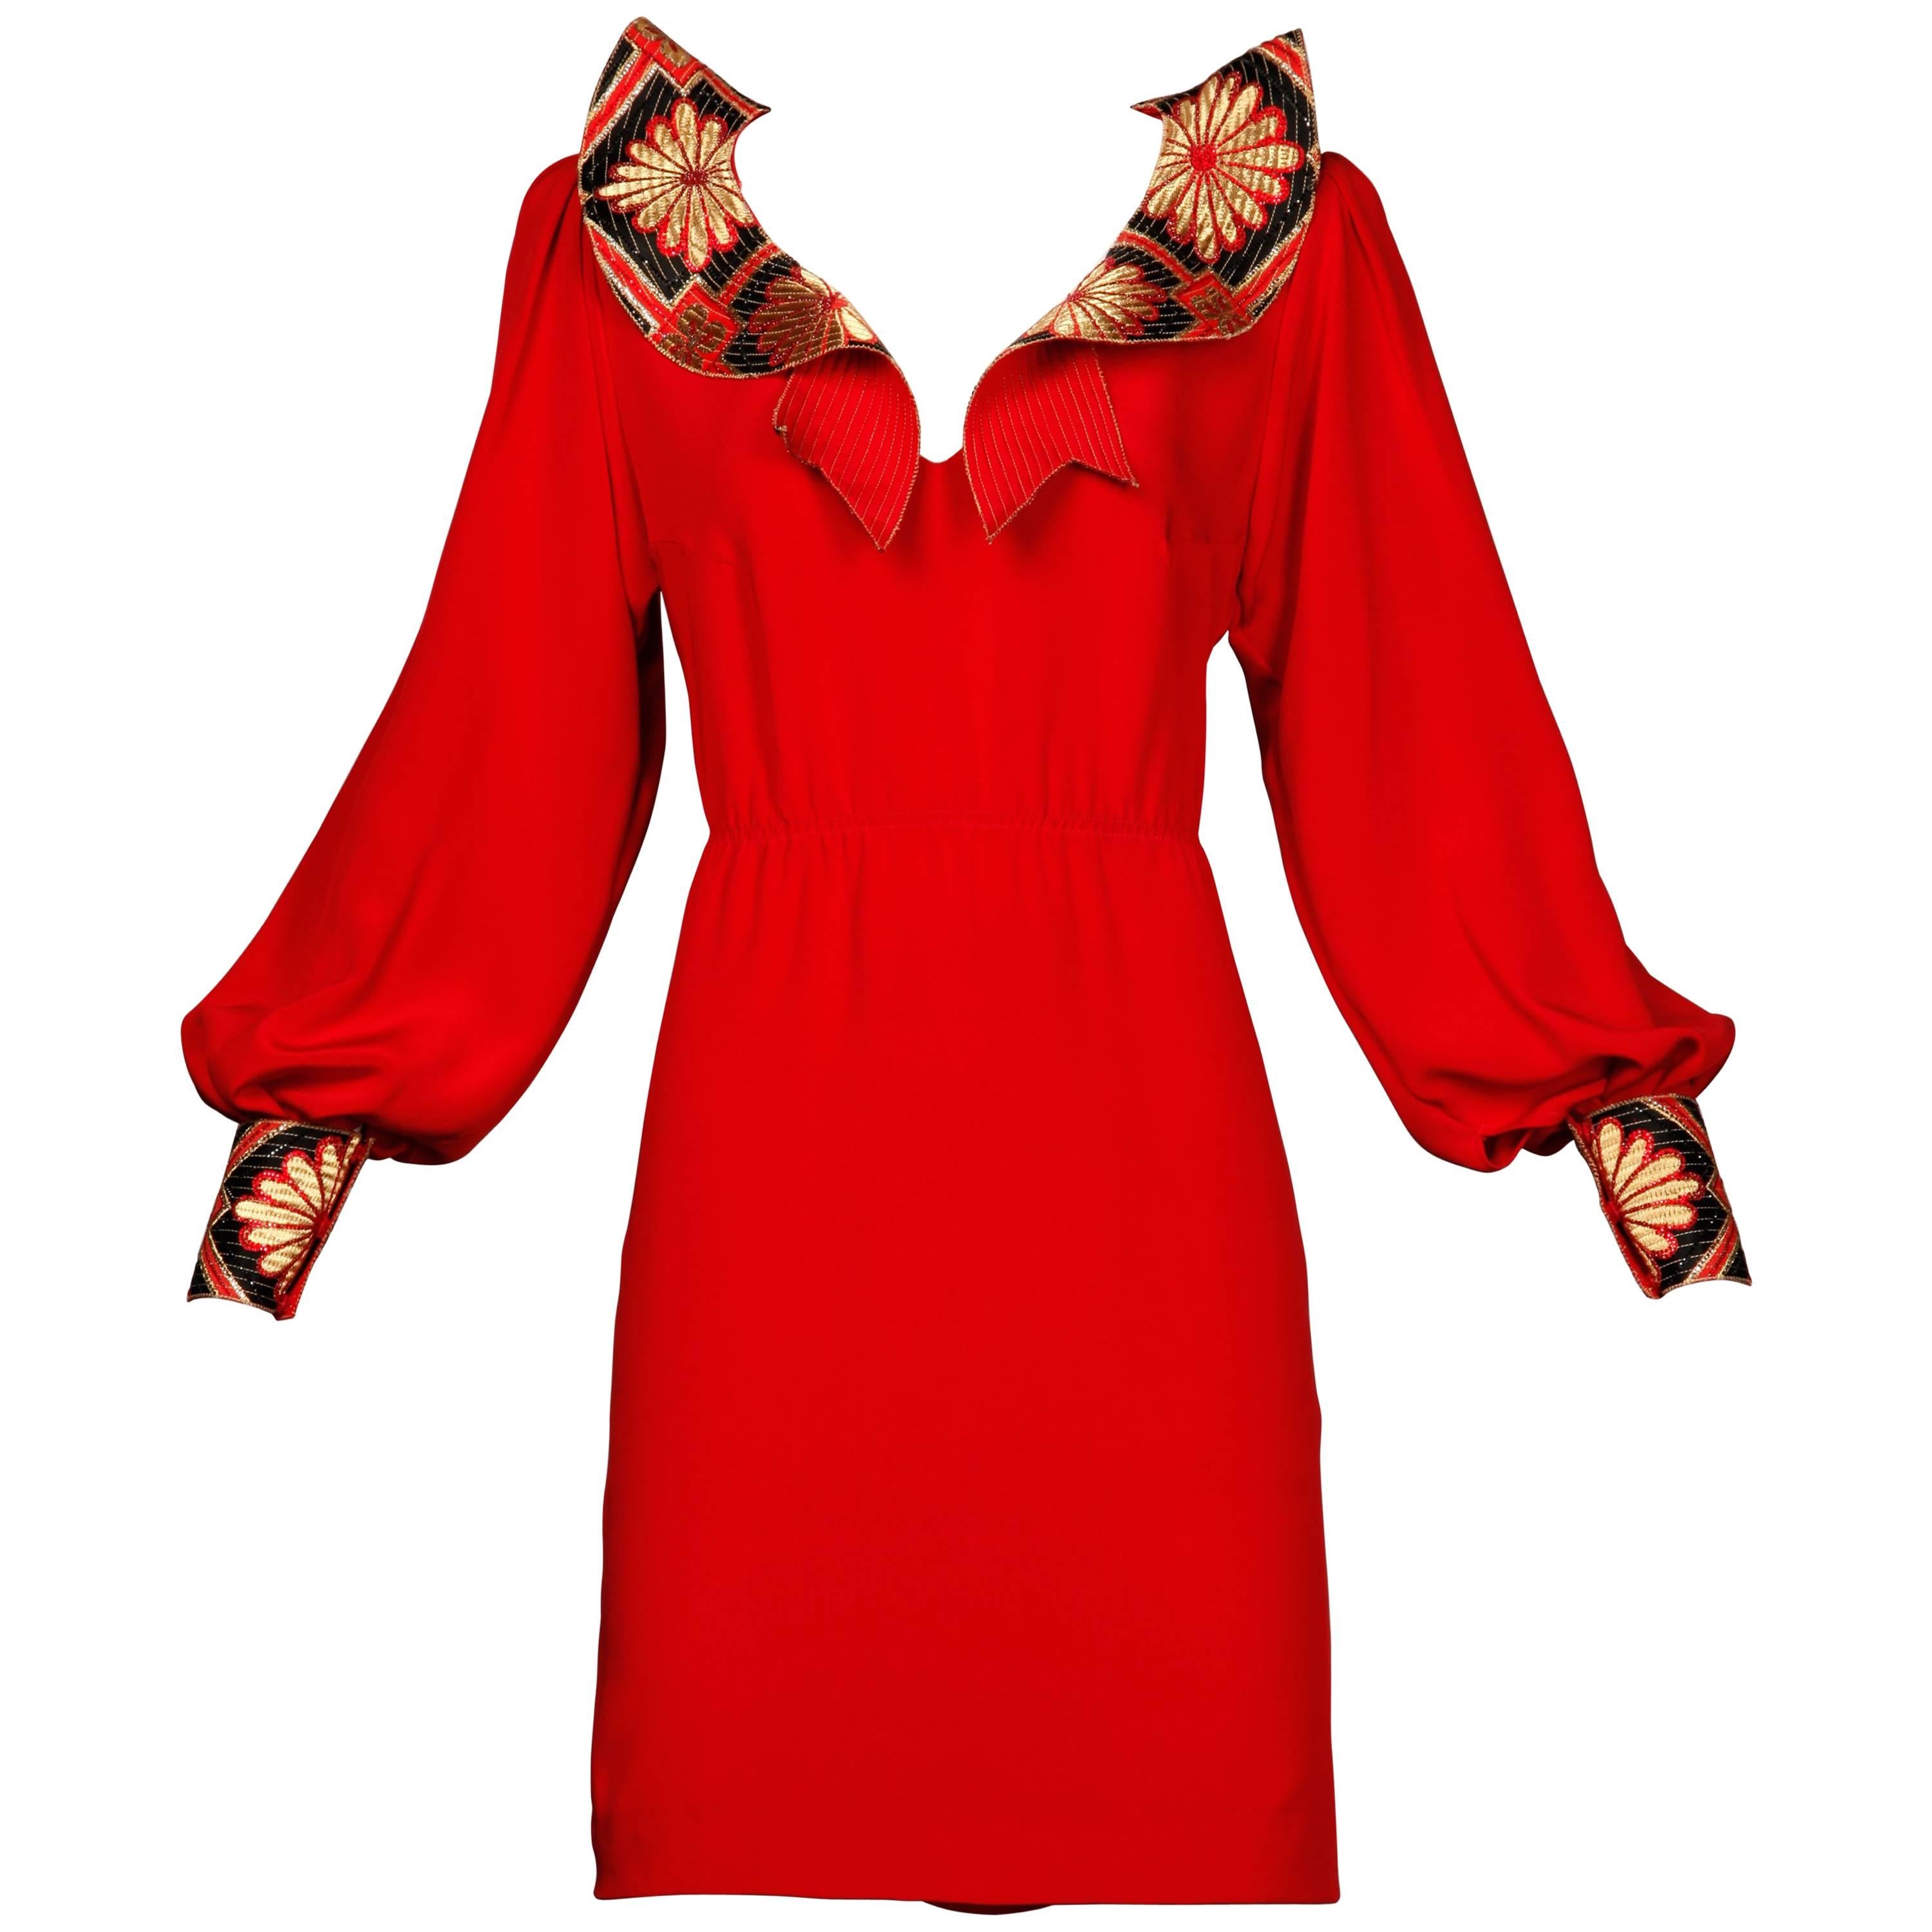 Amen Wardy Vintage Asian-Inspired Red Silk Dress with Rhinestones For Sale